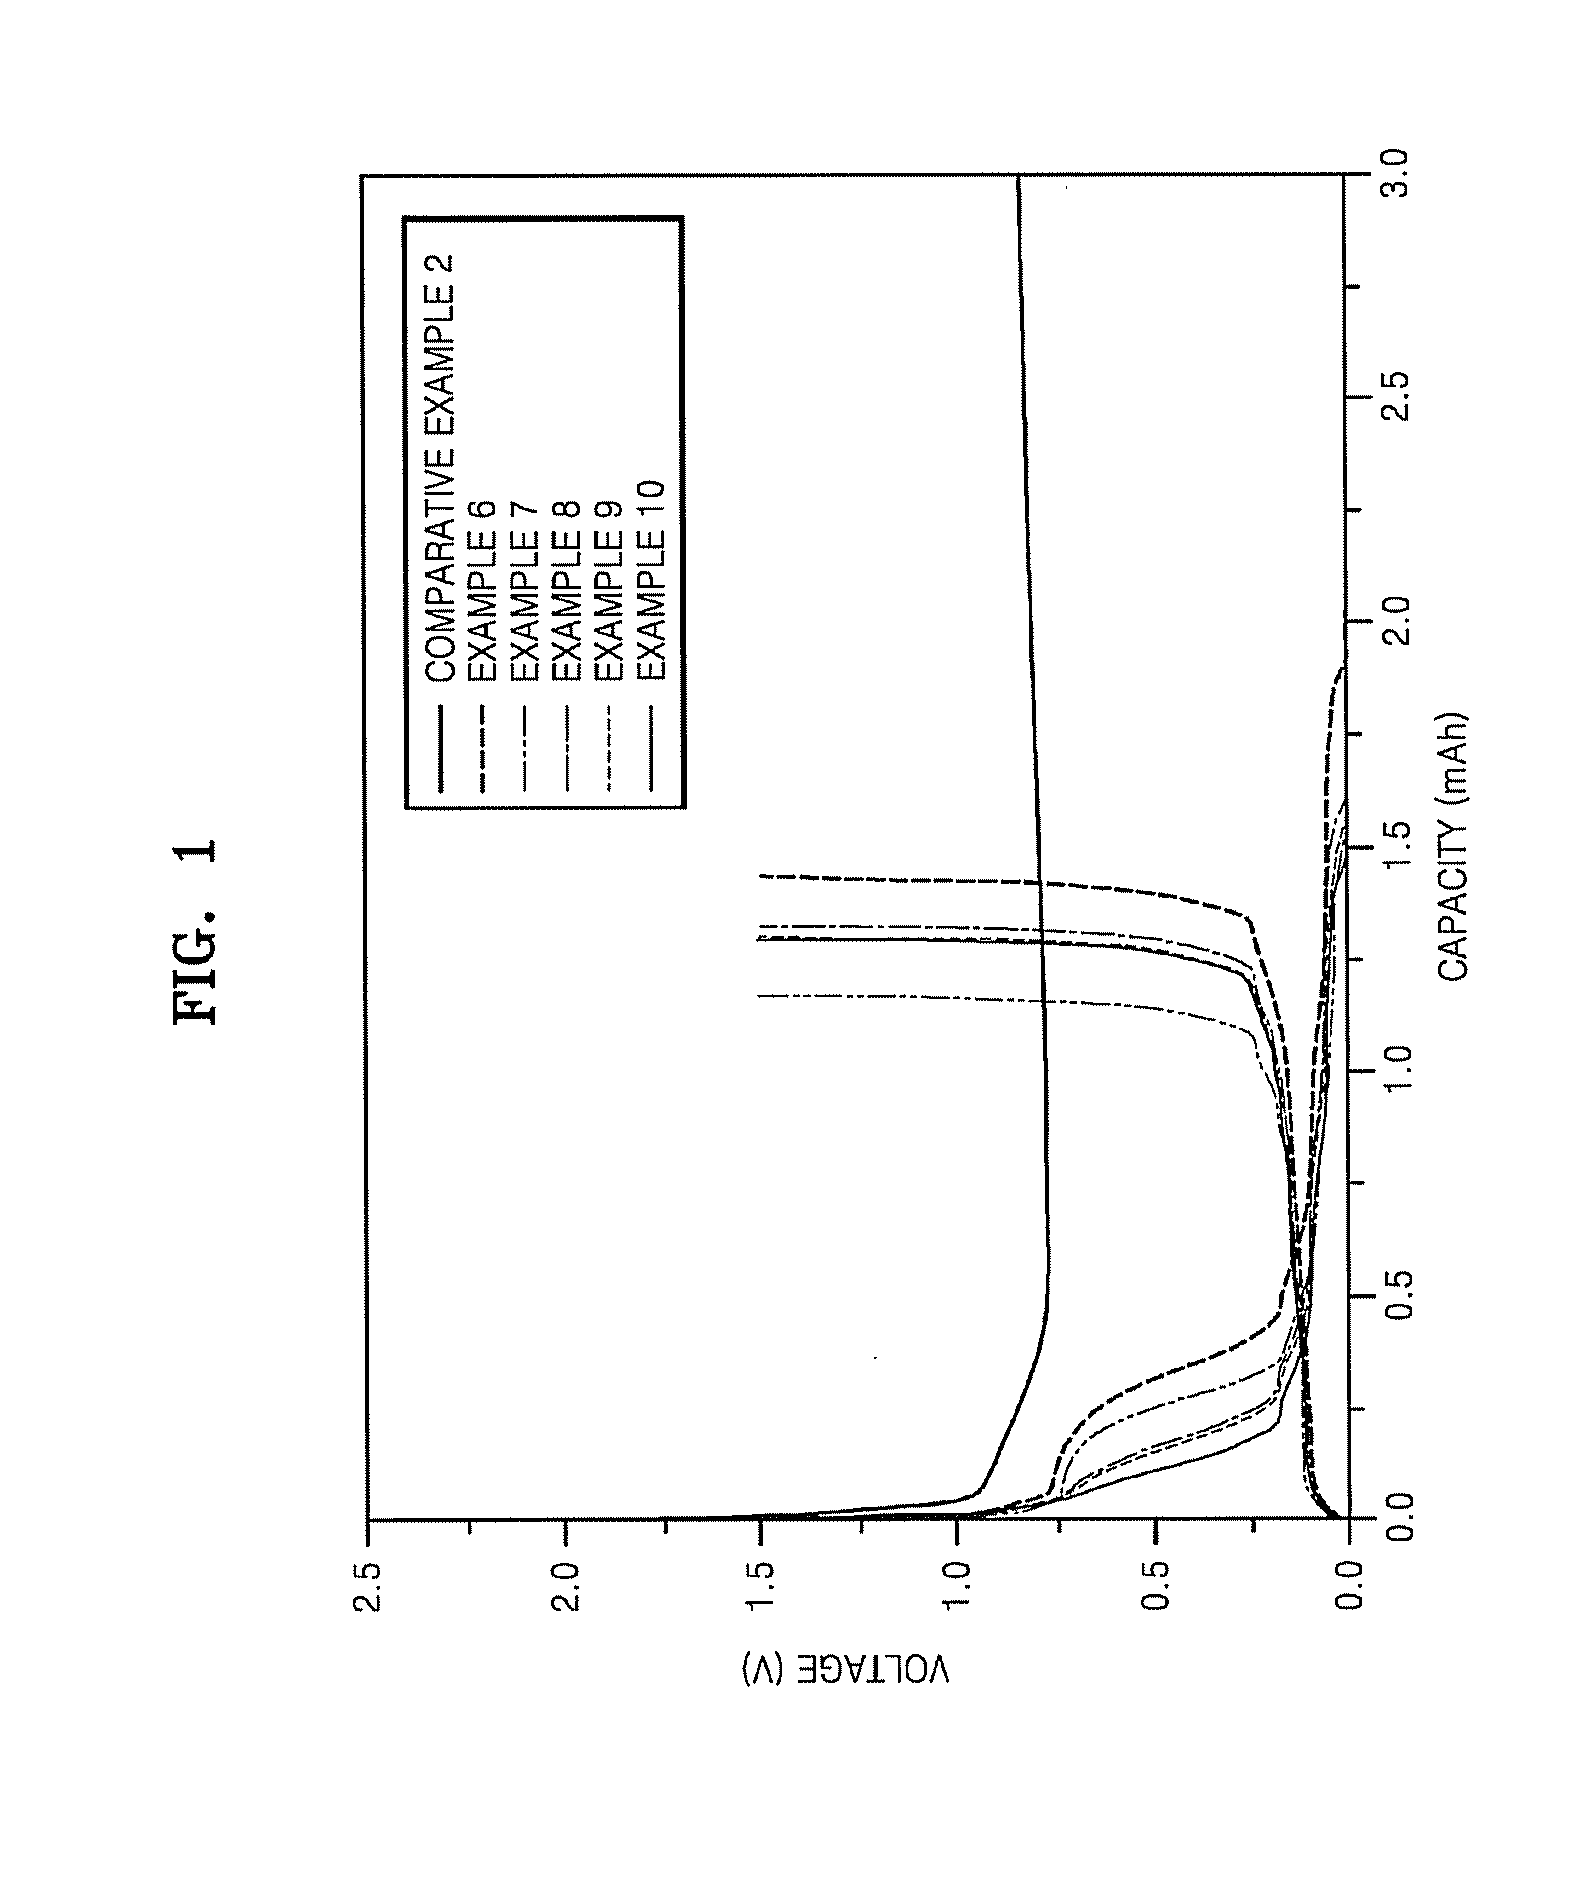 Organic electrolytic solution comprising glycidyl ether compund and lithium battery employing the same